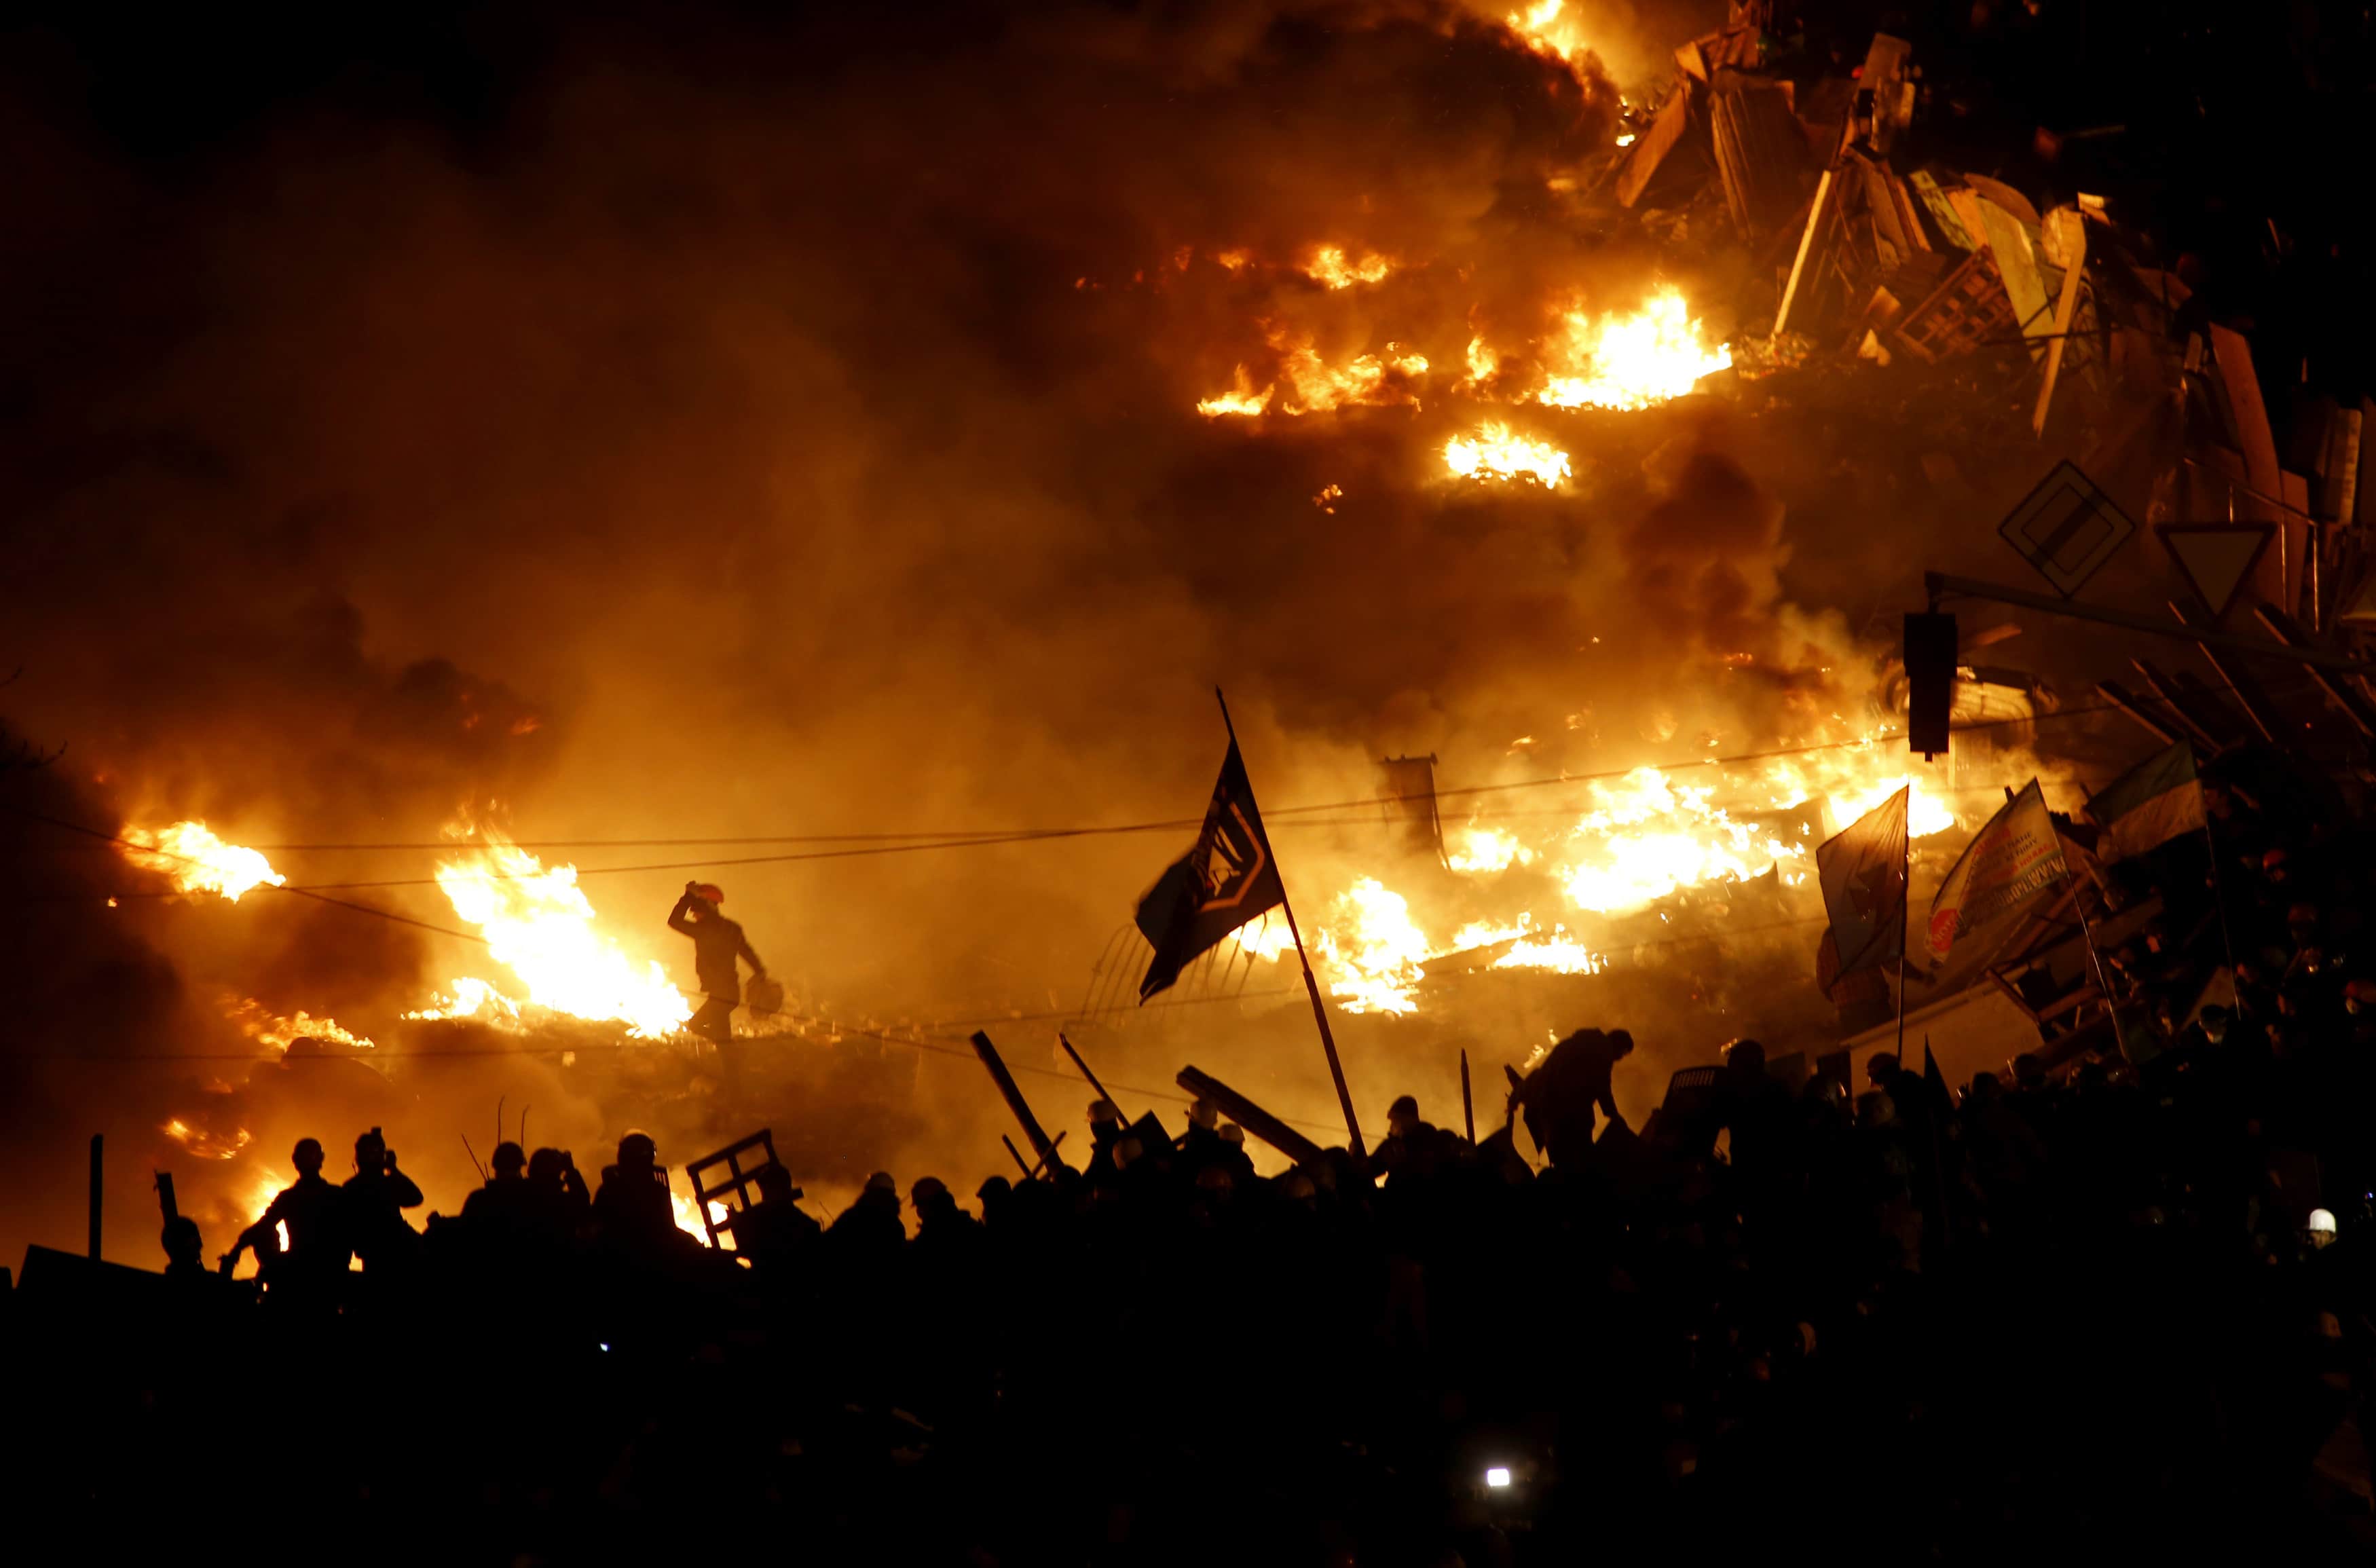 Anti-government protesters stand behind burning barricades in Kiev's Independence Square, 19 February 2014., REUTERS/Vasily Fedosenko